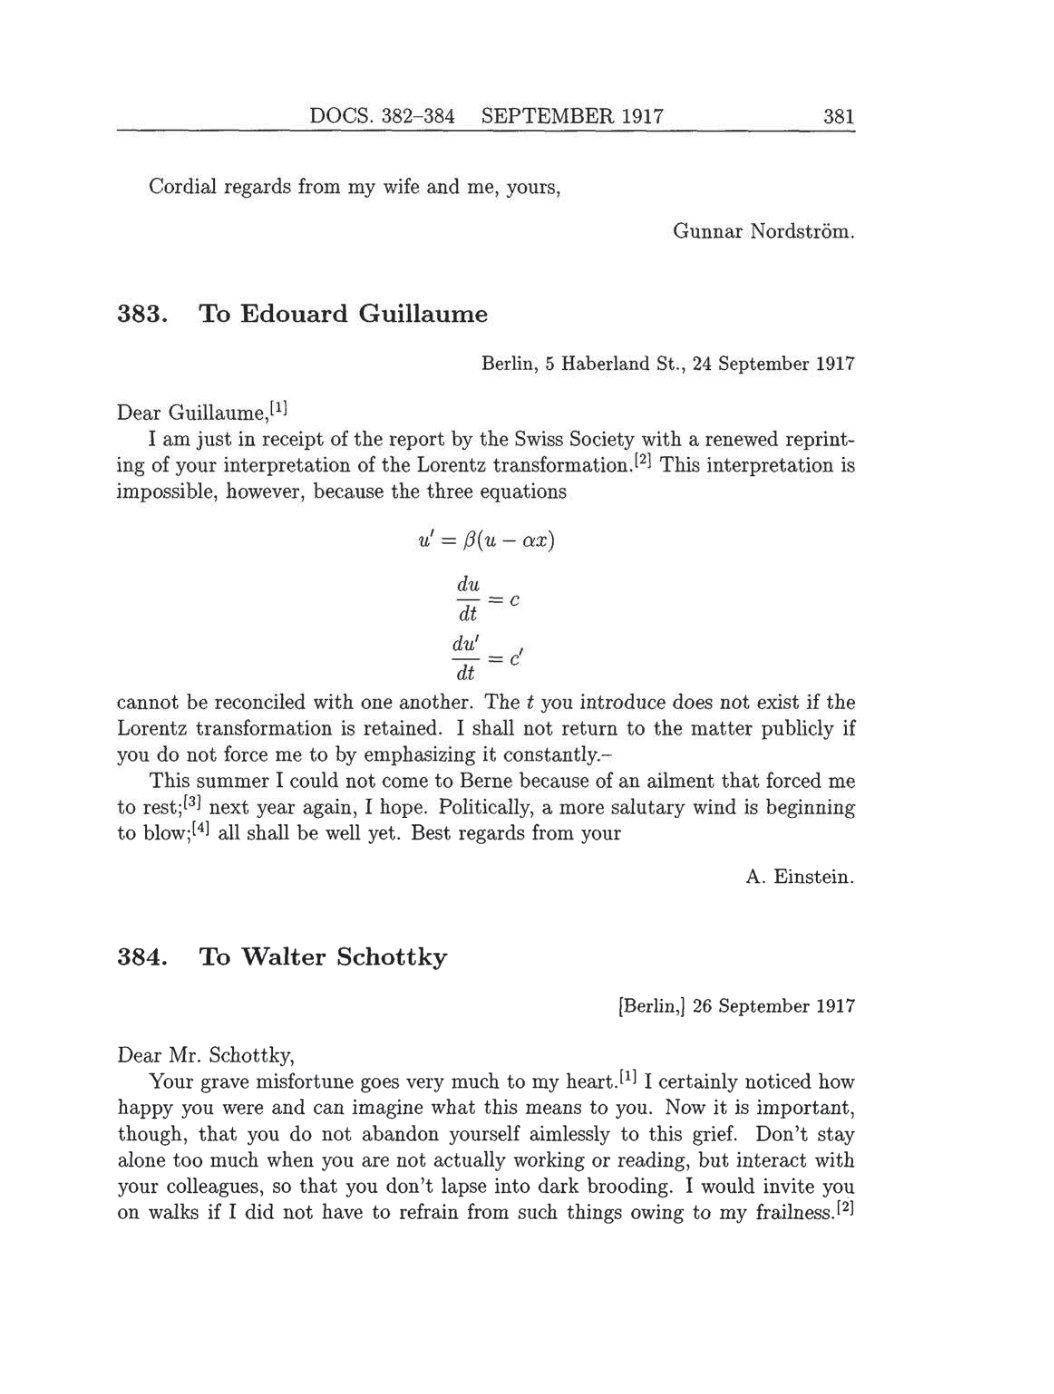 Volume 8: The Berlin Years: Correspondence, 1914-1918 (English translation supplement) page 381